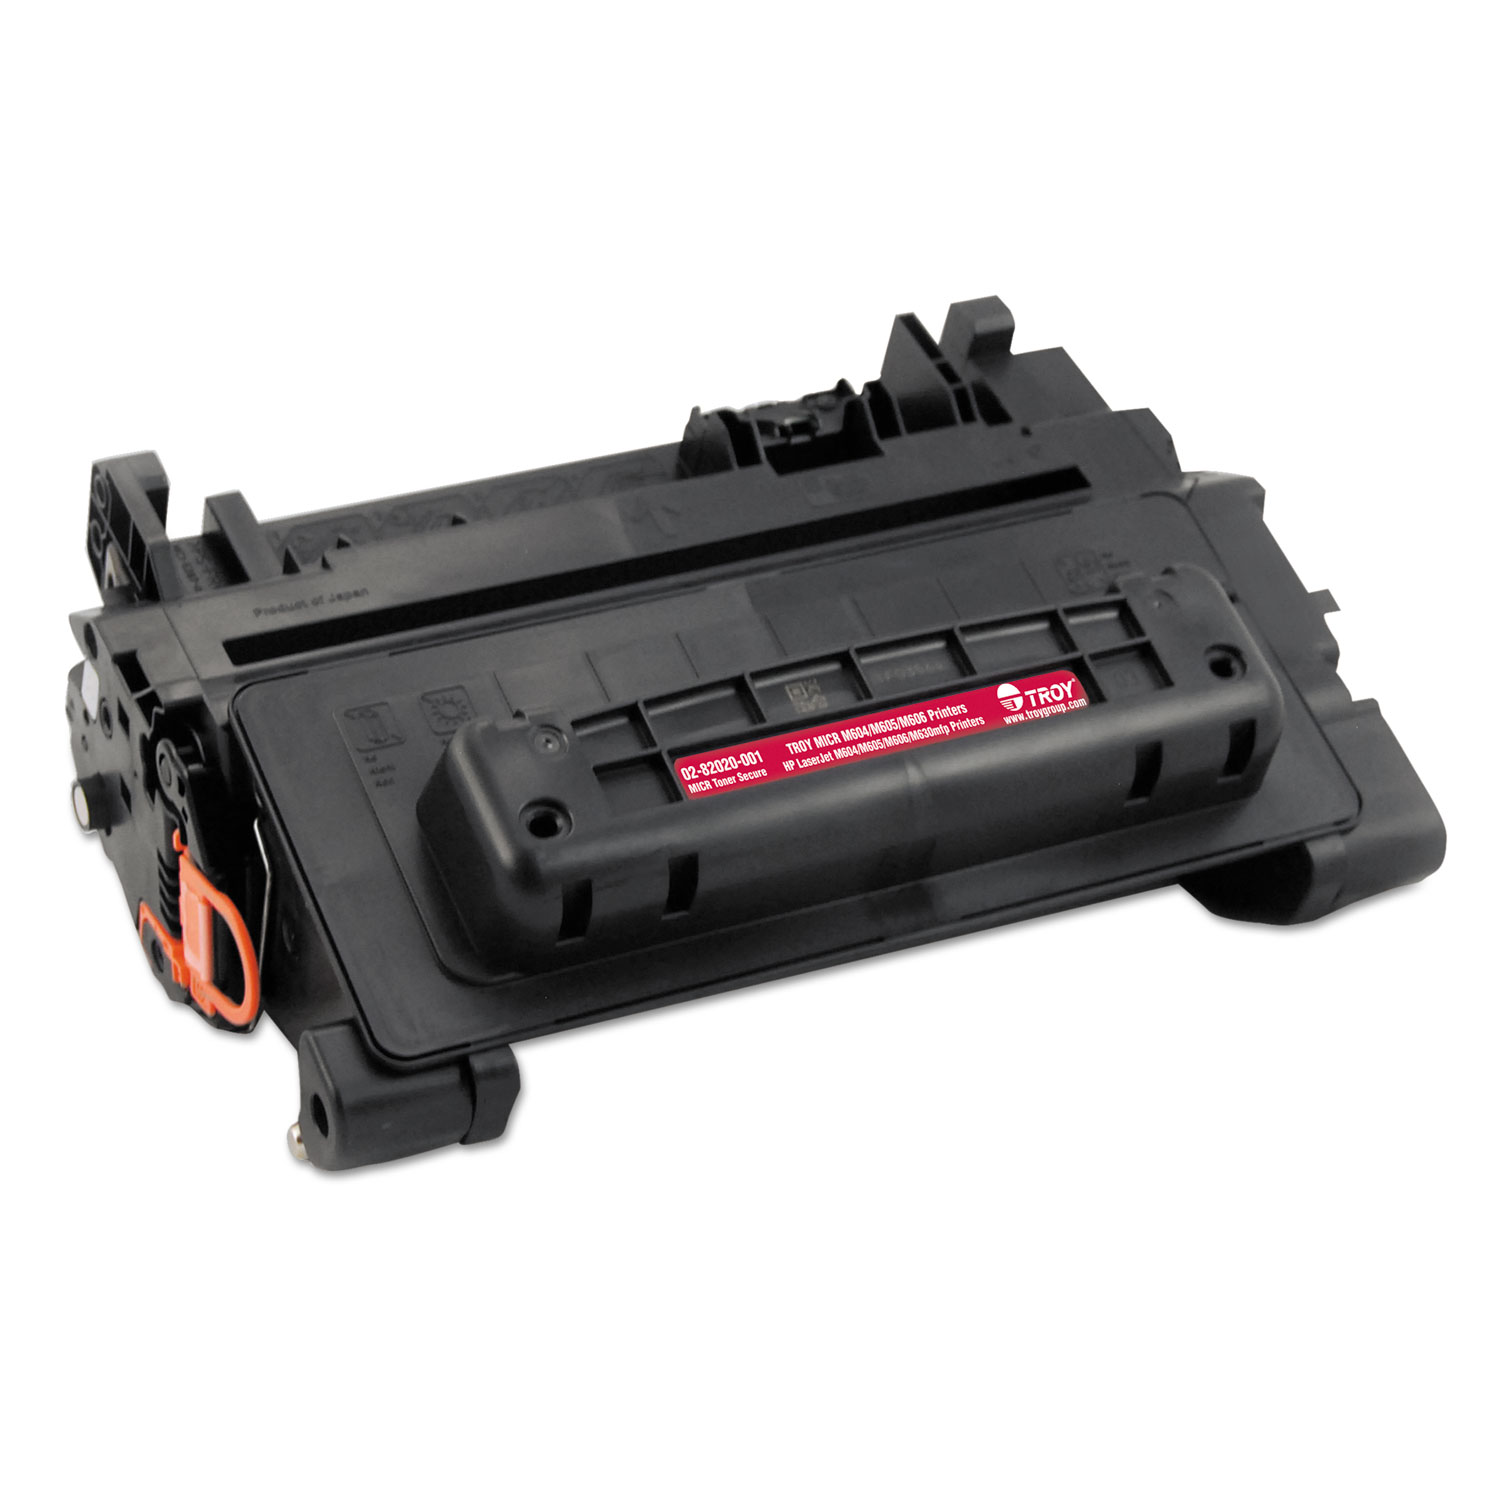  TROY 02-82020-001 0282020001 281A MICR Toner Secure, Alternative for HP CF281A, Black (TRS0282020001) 